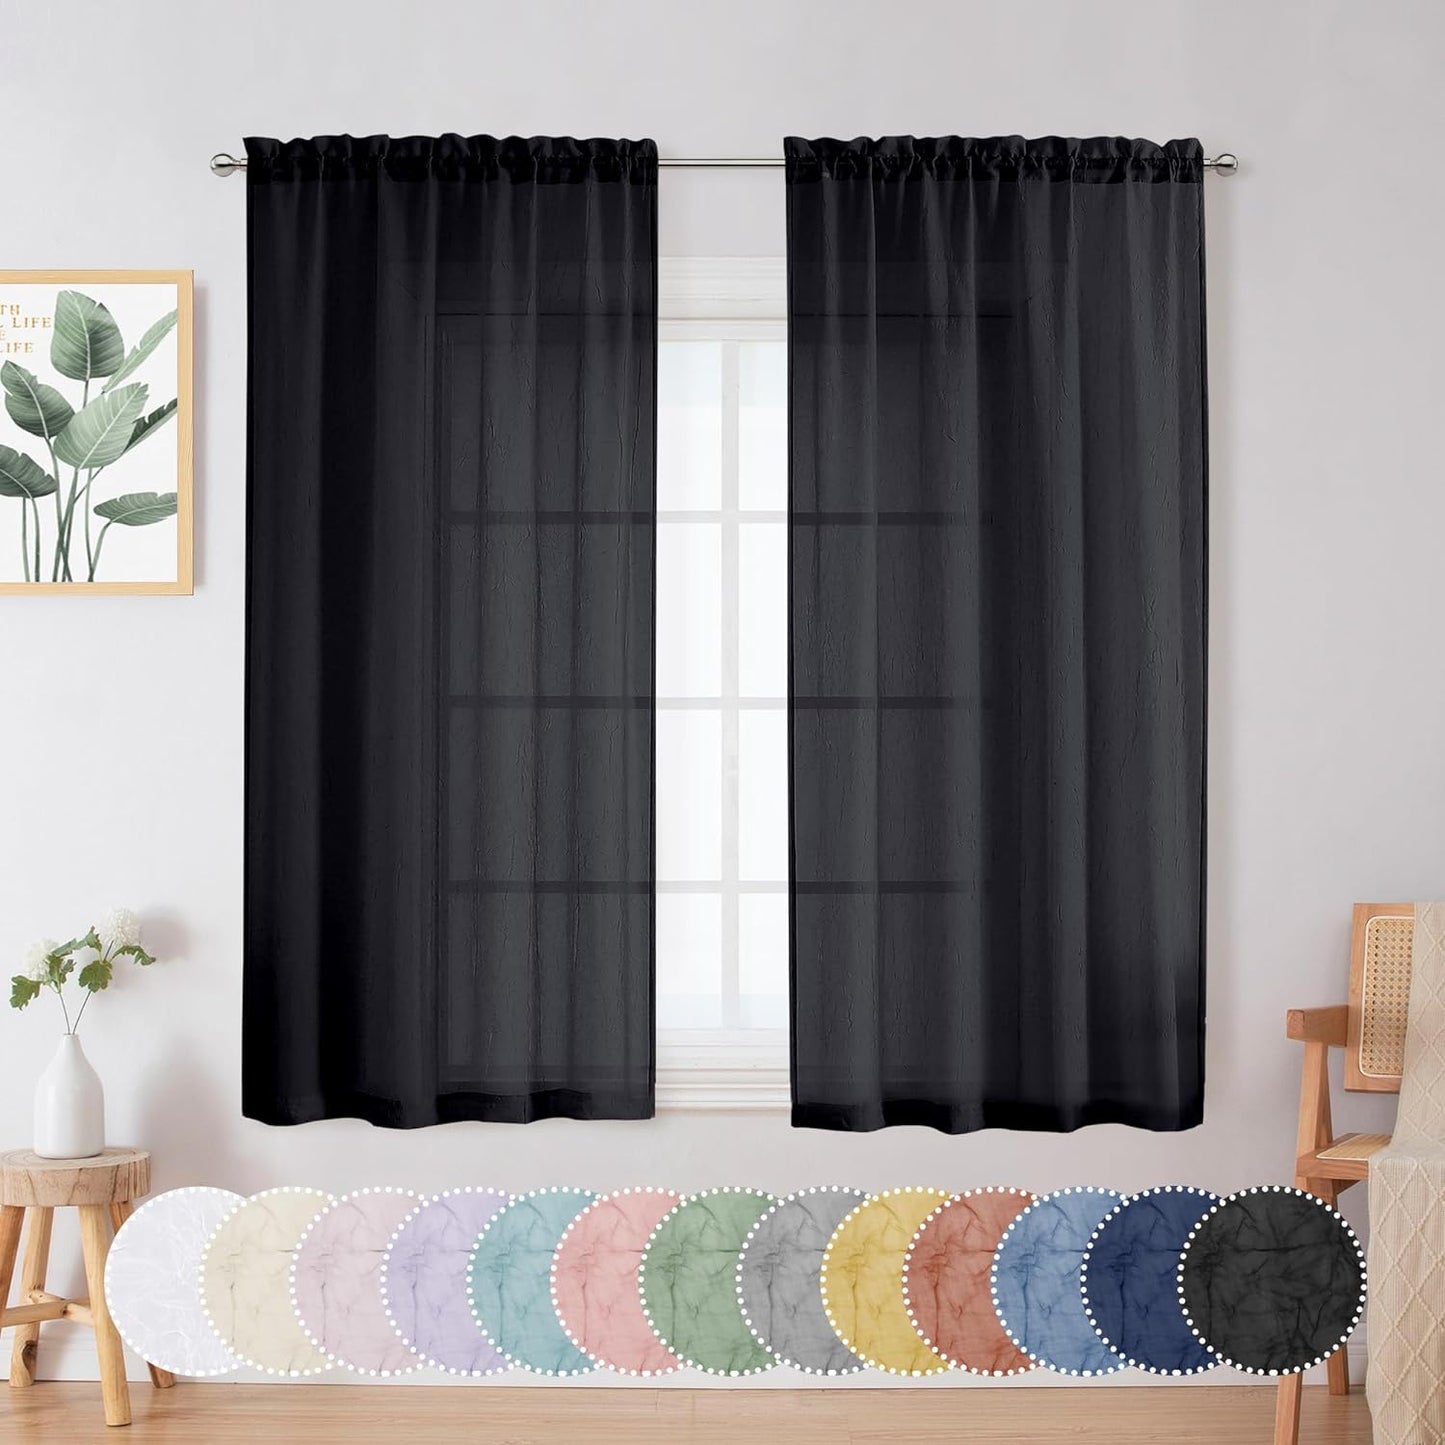 Chyhomenyc Crushed White Sheer Valances for Window 14 Inch Length 2 PCS, Crinkle Voile Short Kitchen Curtains with Dual Rod Pockets，Gauzy Bedroom Curtain Valance，Each 42Wx14L Inches  Chyhomenyc Black 28 W X 54 L 